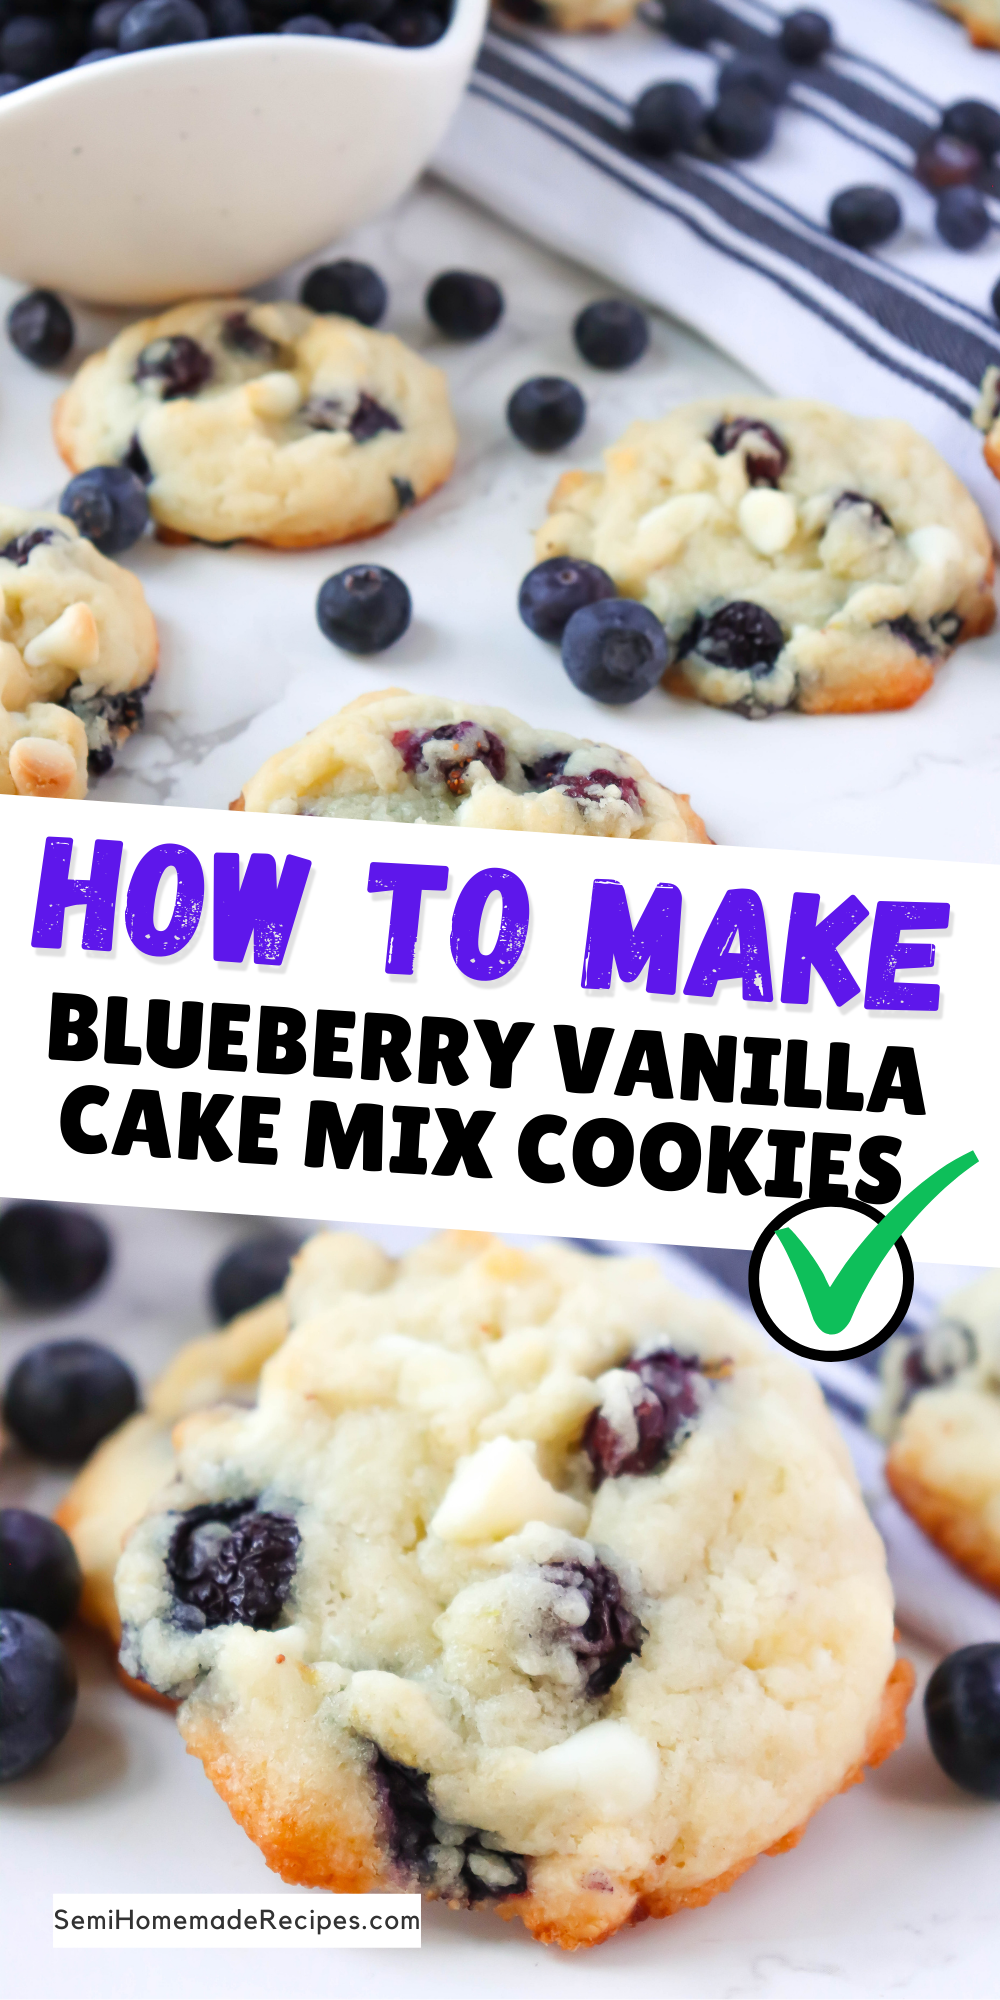 Blueberry Vanilla Cake Mix Cookies - soft semi homemade vanilla cookies that are packed full of white chocolate chips and fresh blueberries!